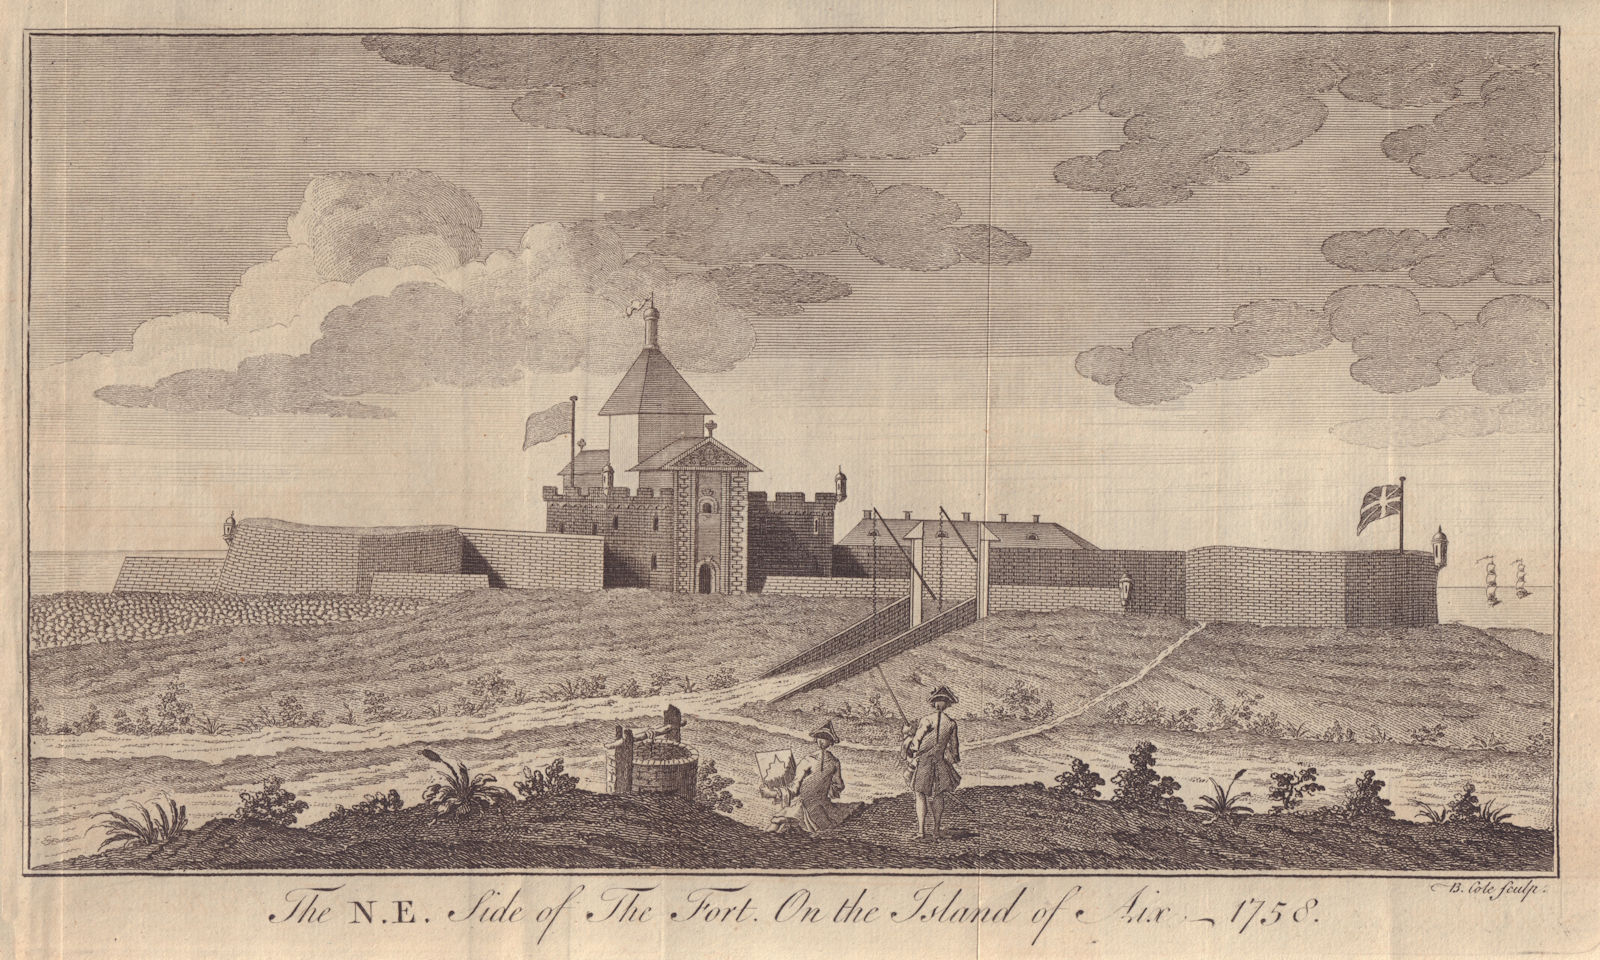 Associate Product The N.E. side of the Fort on the Island of Aix. Île-d'Aix Charente-Maritime 1758